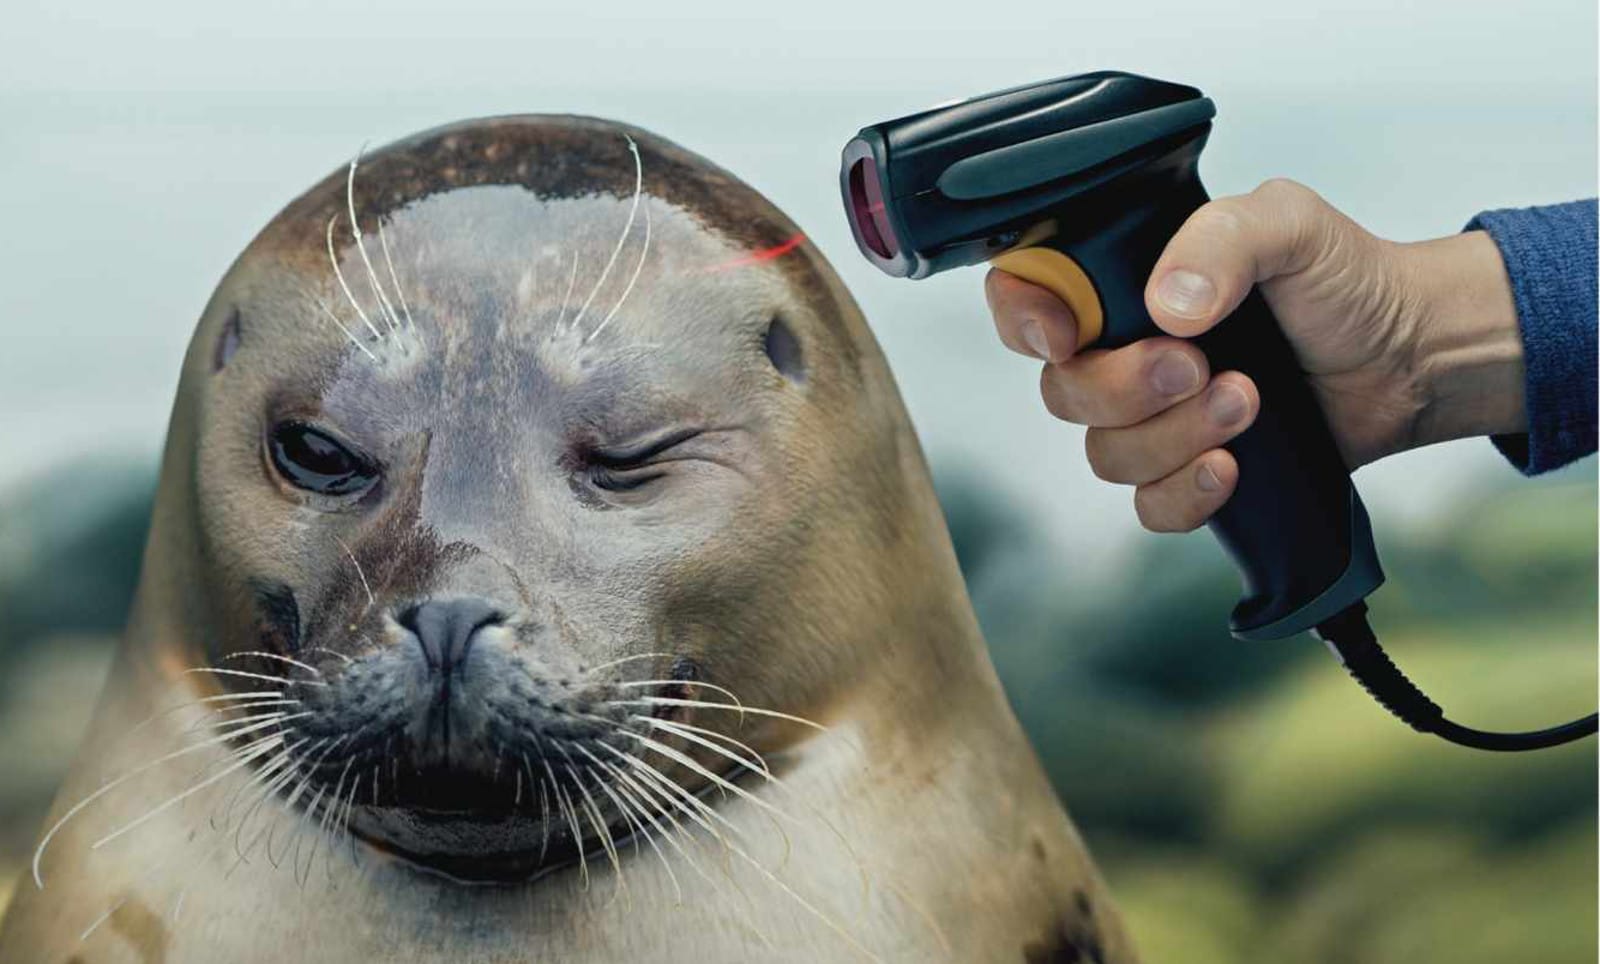 Powerful Ads Featuring Marine Animals at 'Gunpoint' Will Make You Reconsider Your Plastic Use